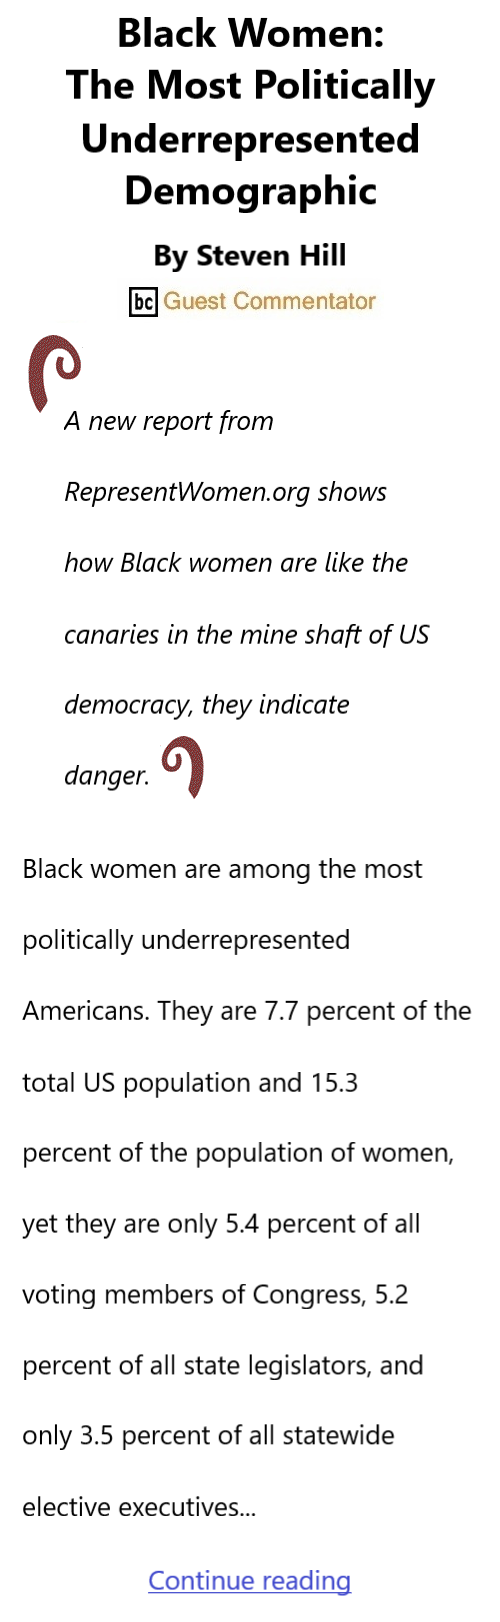 BlackCommentator.com Feb 22, 2024 - Issue 989: Black History Month - Black Women: The Most Politically Underrepresented Demographic By Steven Hill, BC Guest Commentator